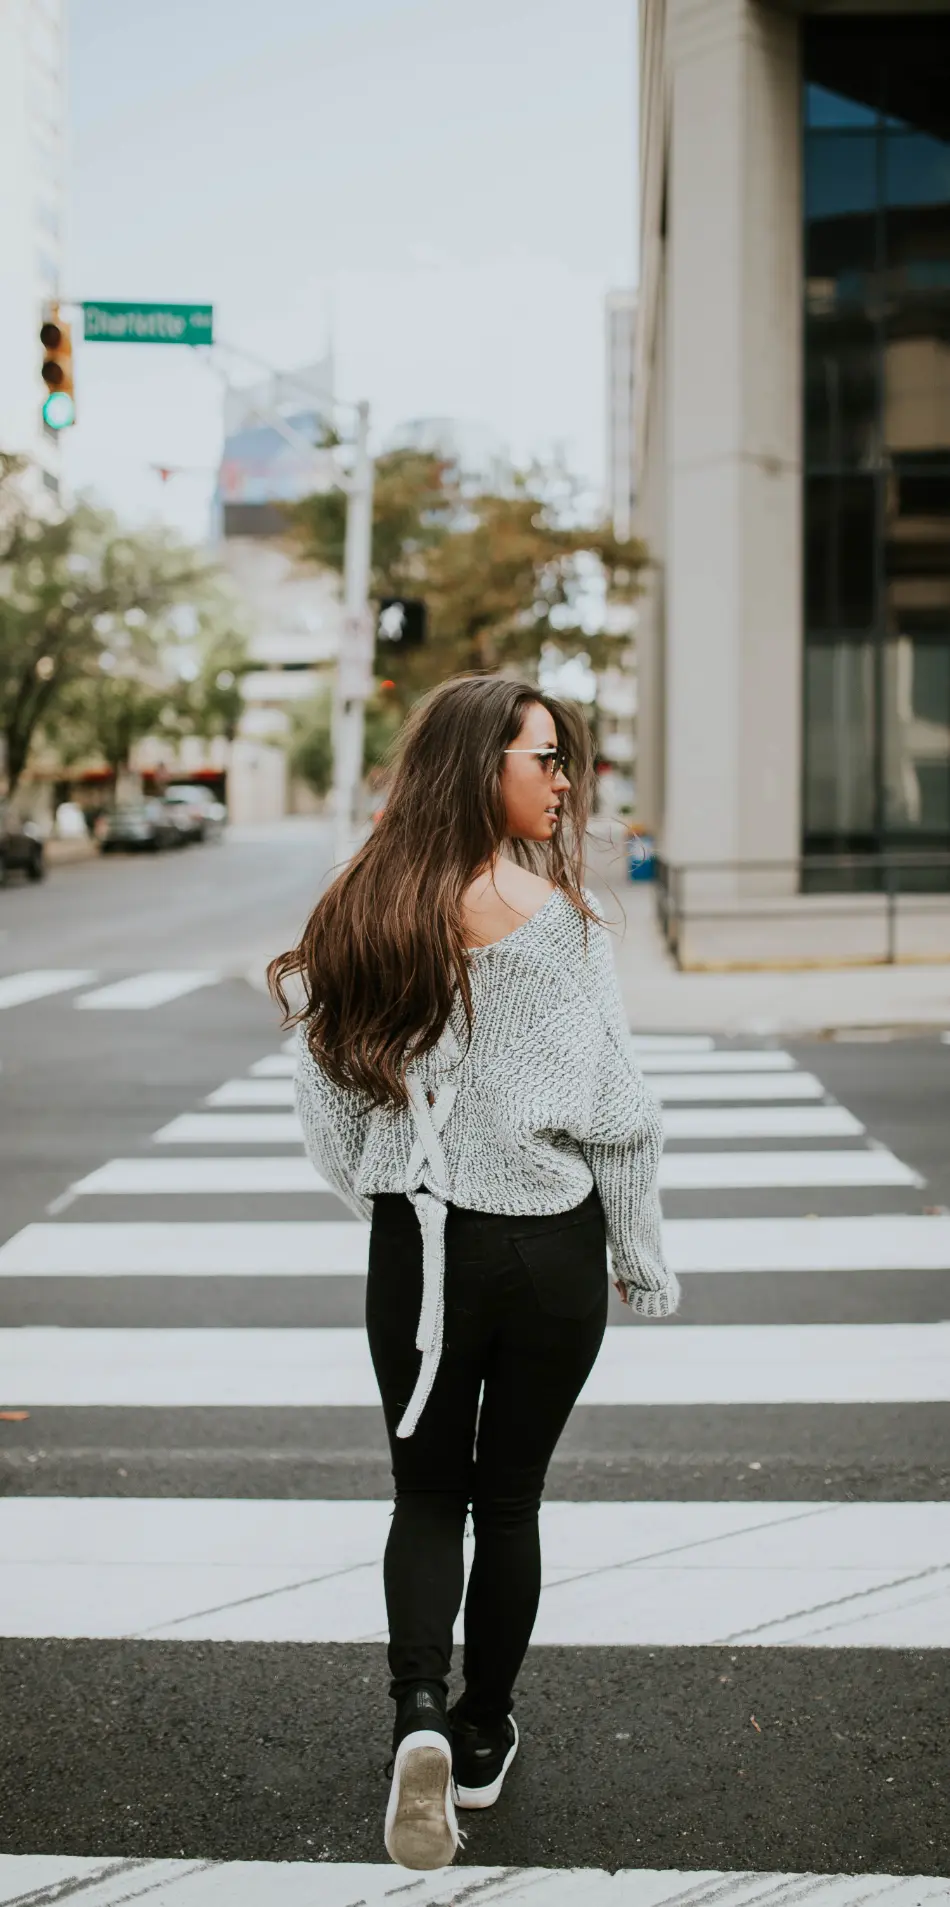 Woman wearing a gray sweater, with black leggings yoga pants, and sneakers, crossing a zebra striped crosswalk and looking over her right shoulder